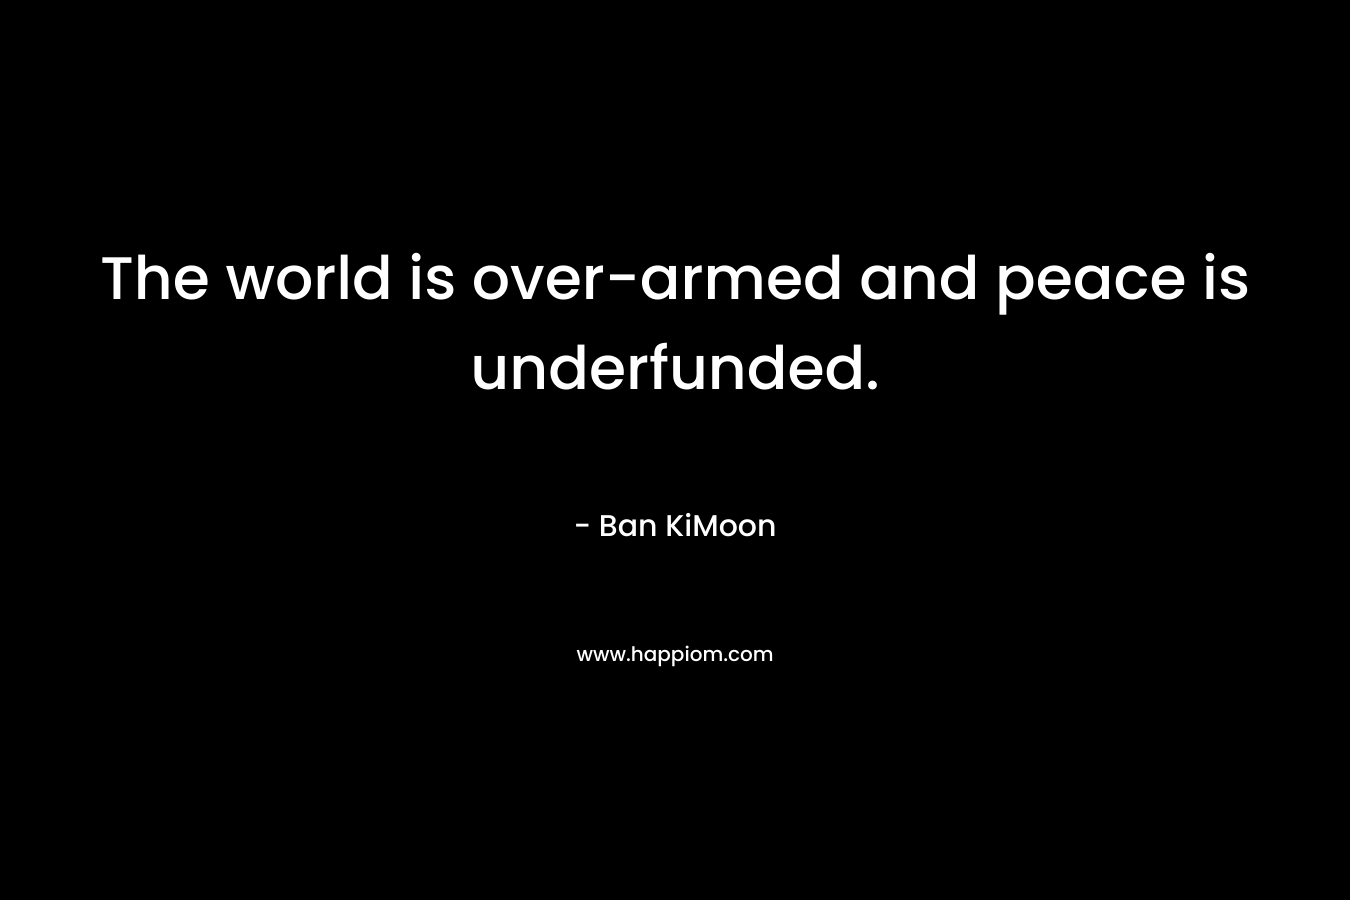 The world is over-armed and peace is underfunded.